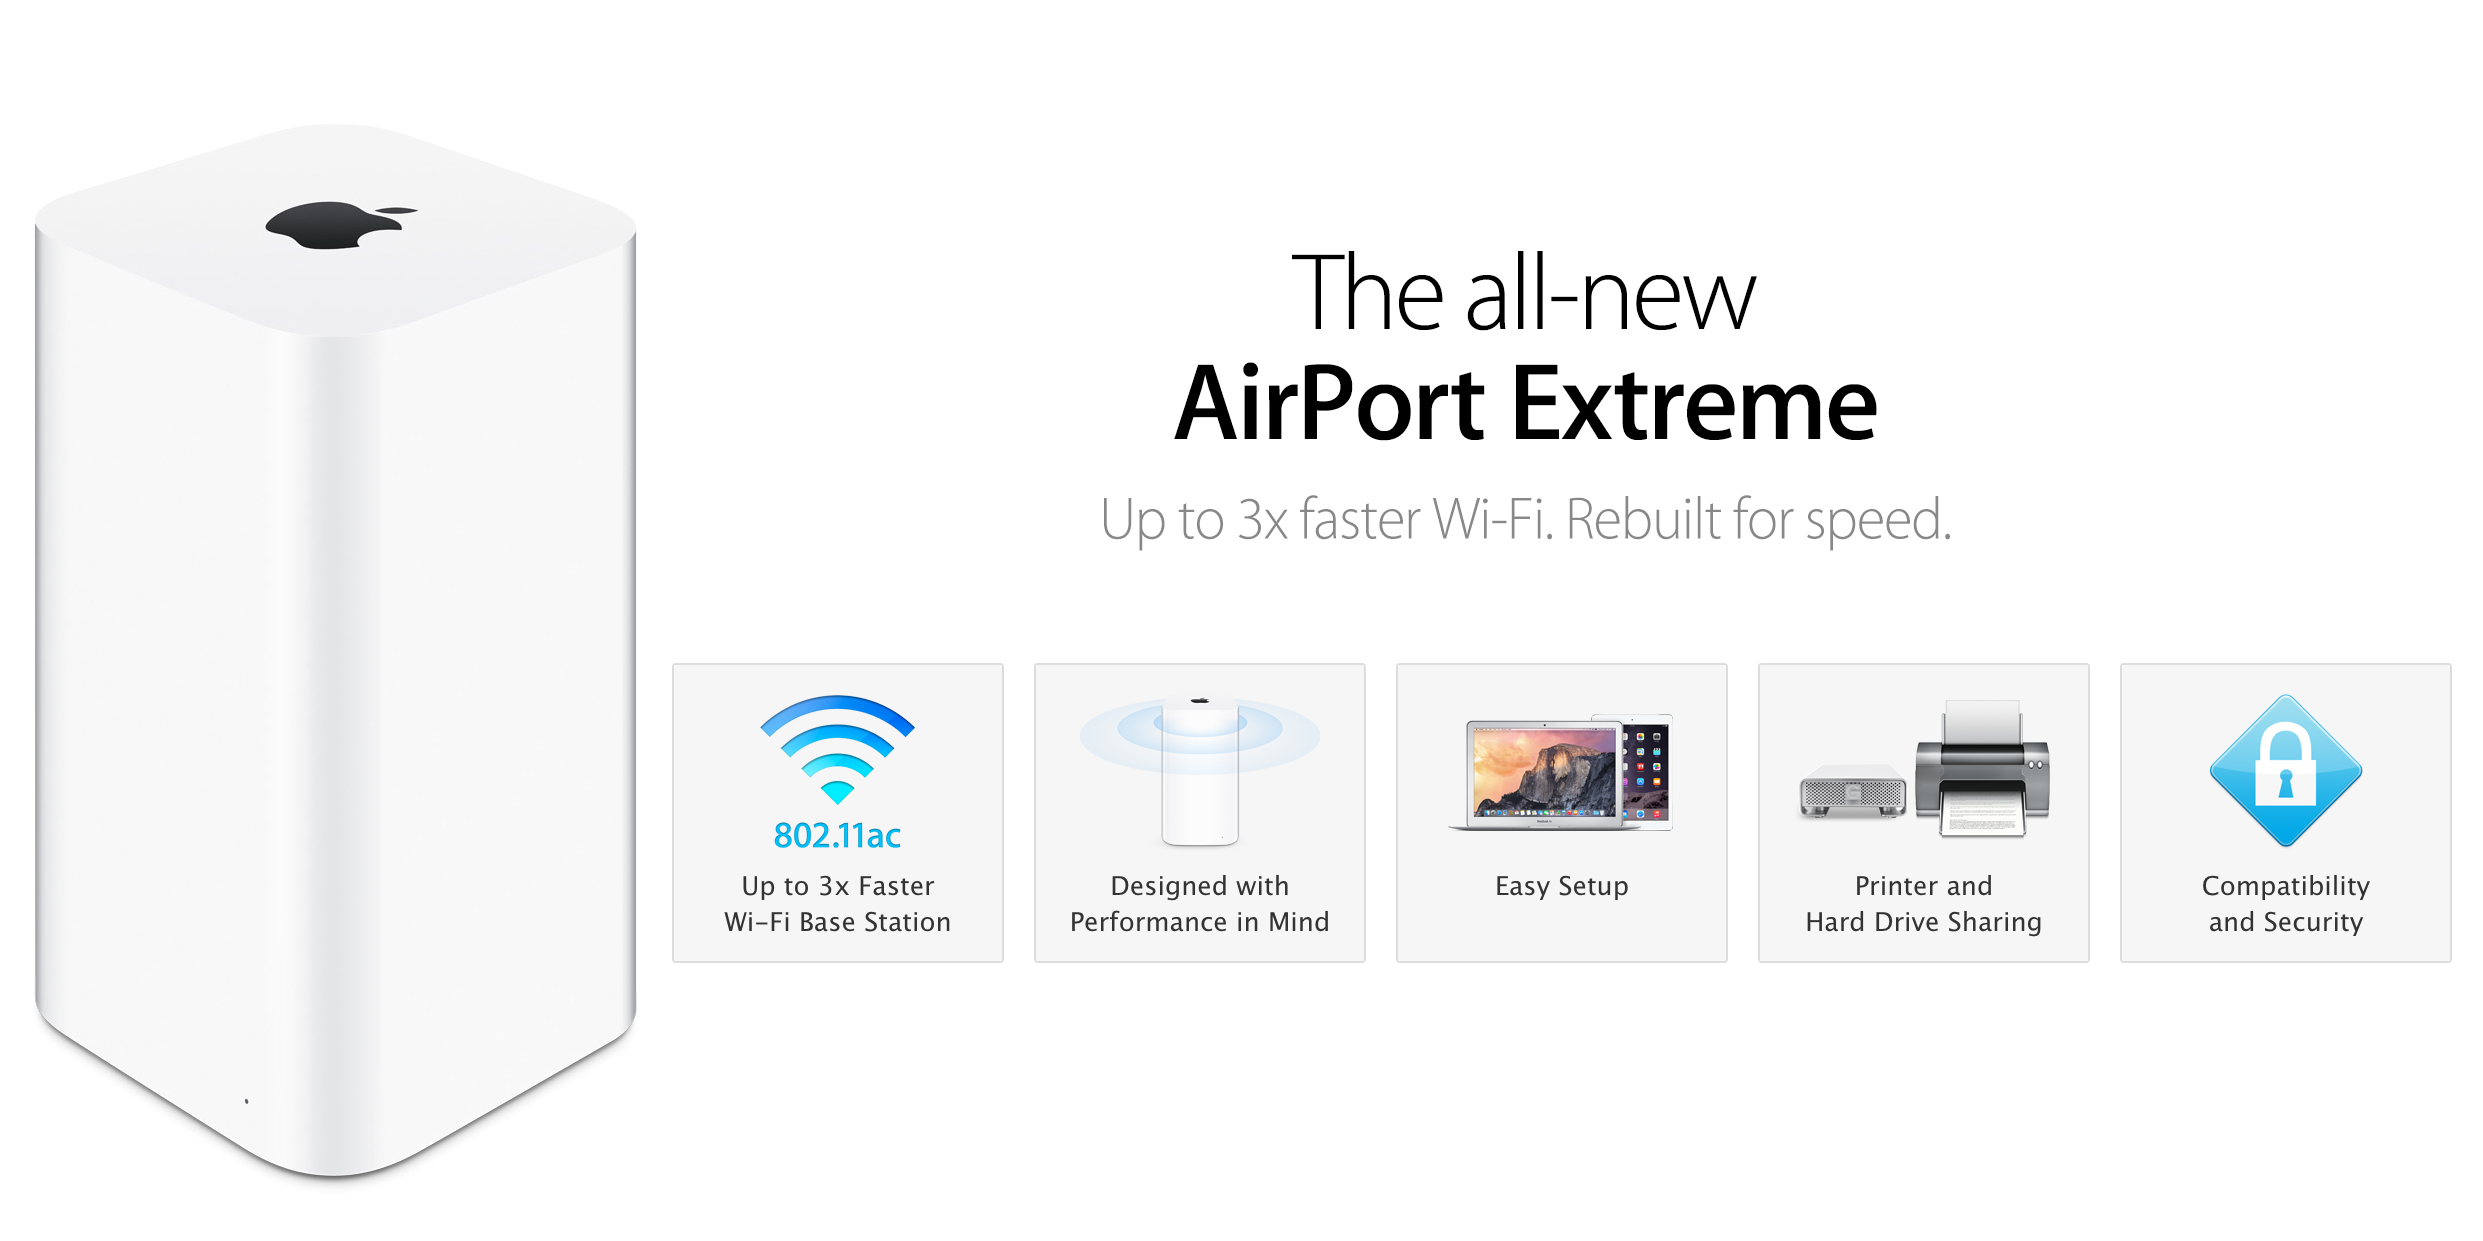 Apple AirPort Extreme Wireless (refurbished): $100 (Orig. $199)